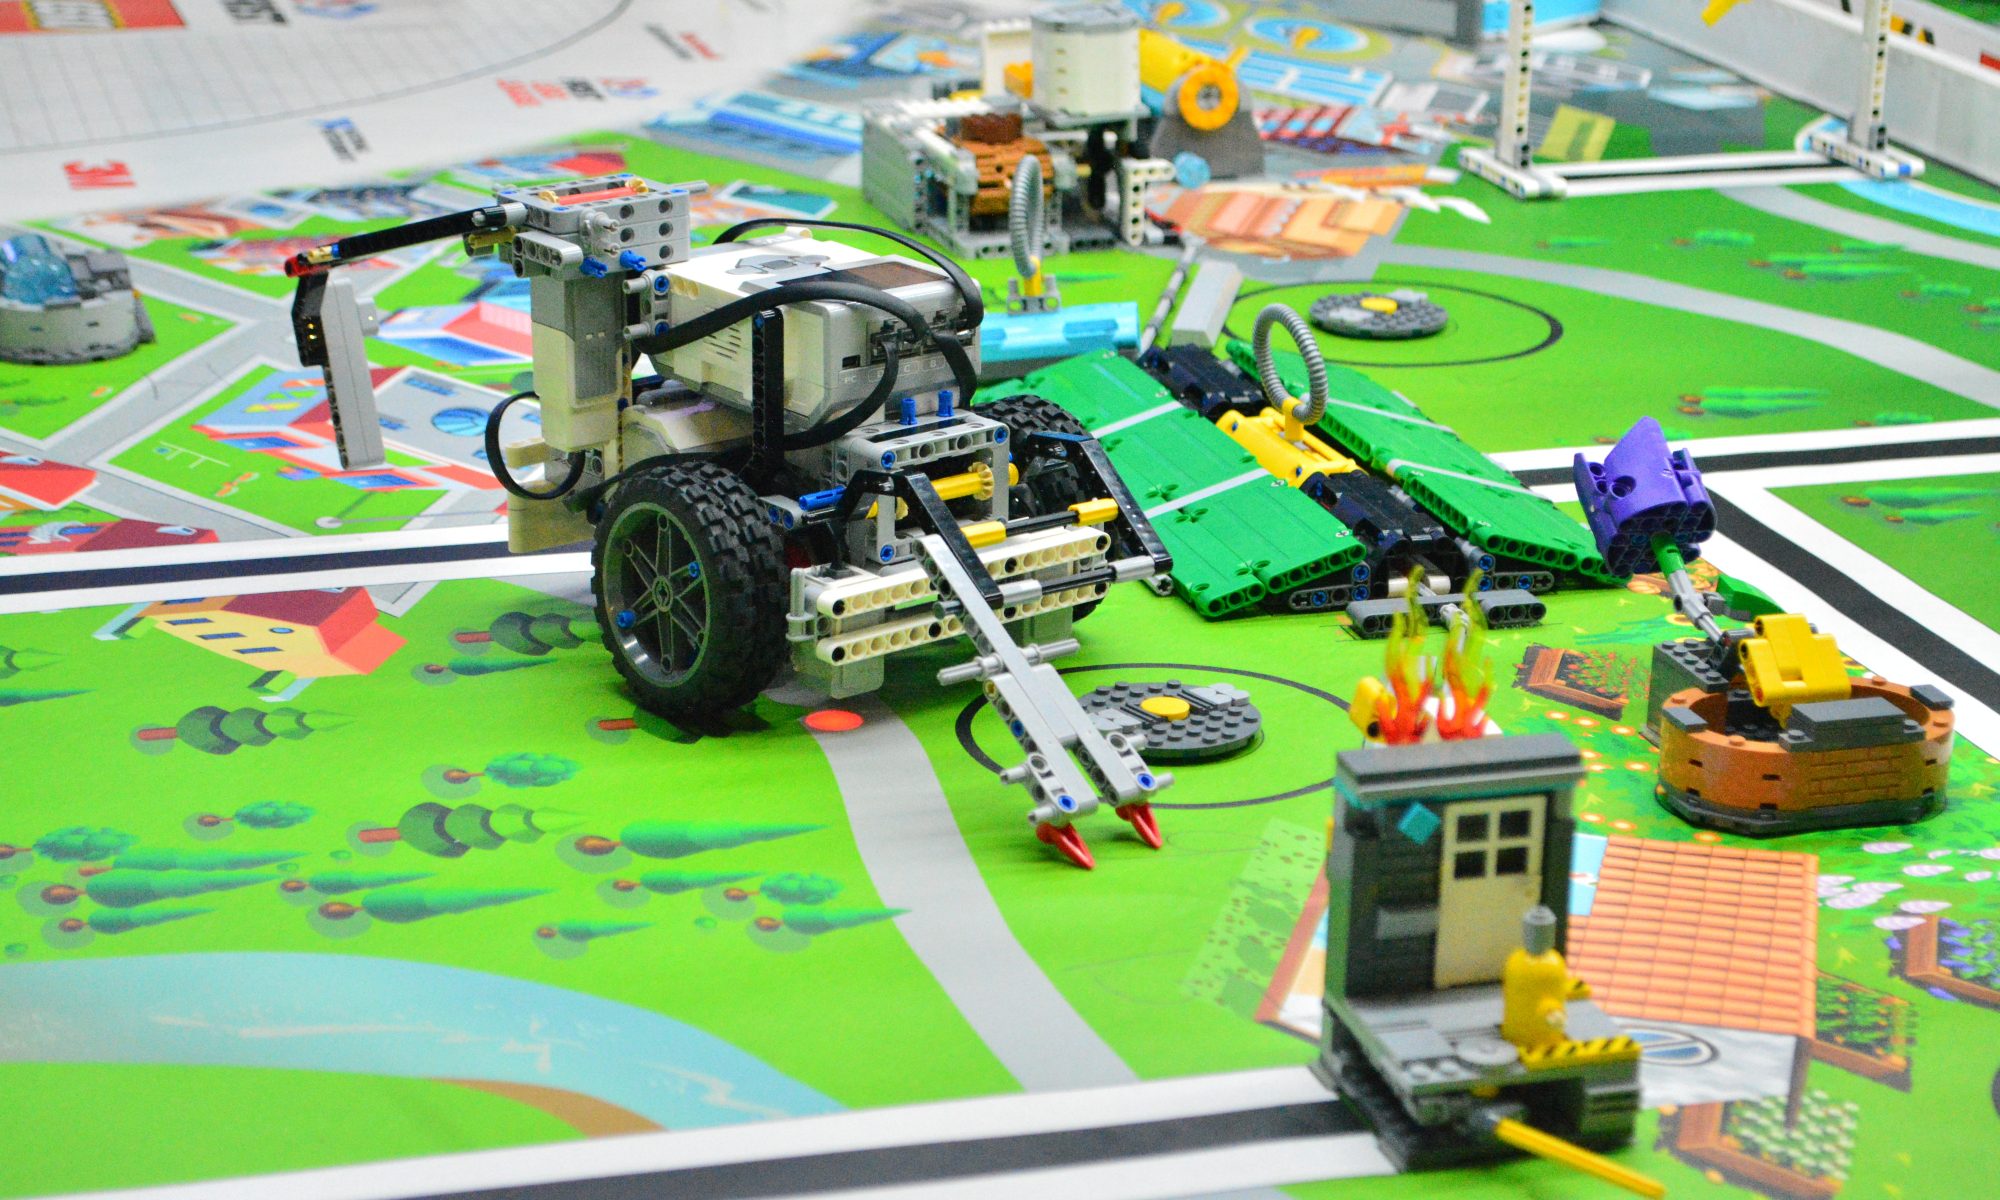 Lego Robot and assorted pieces on a play mat